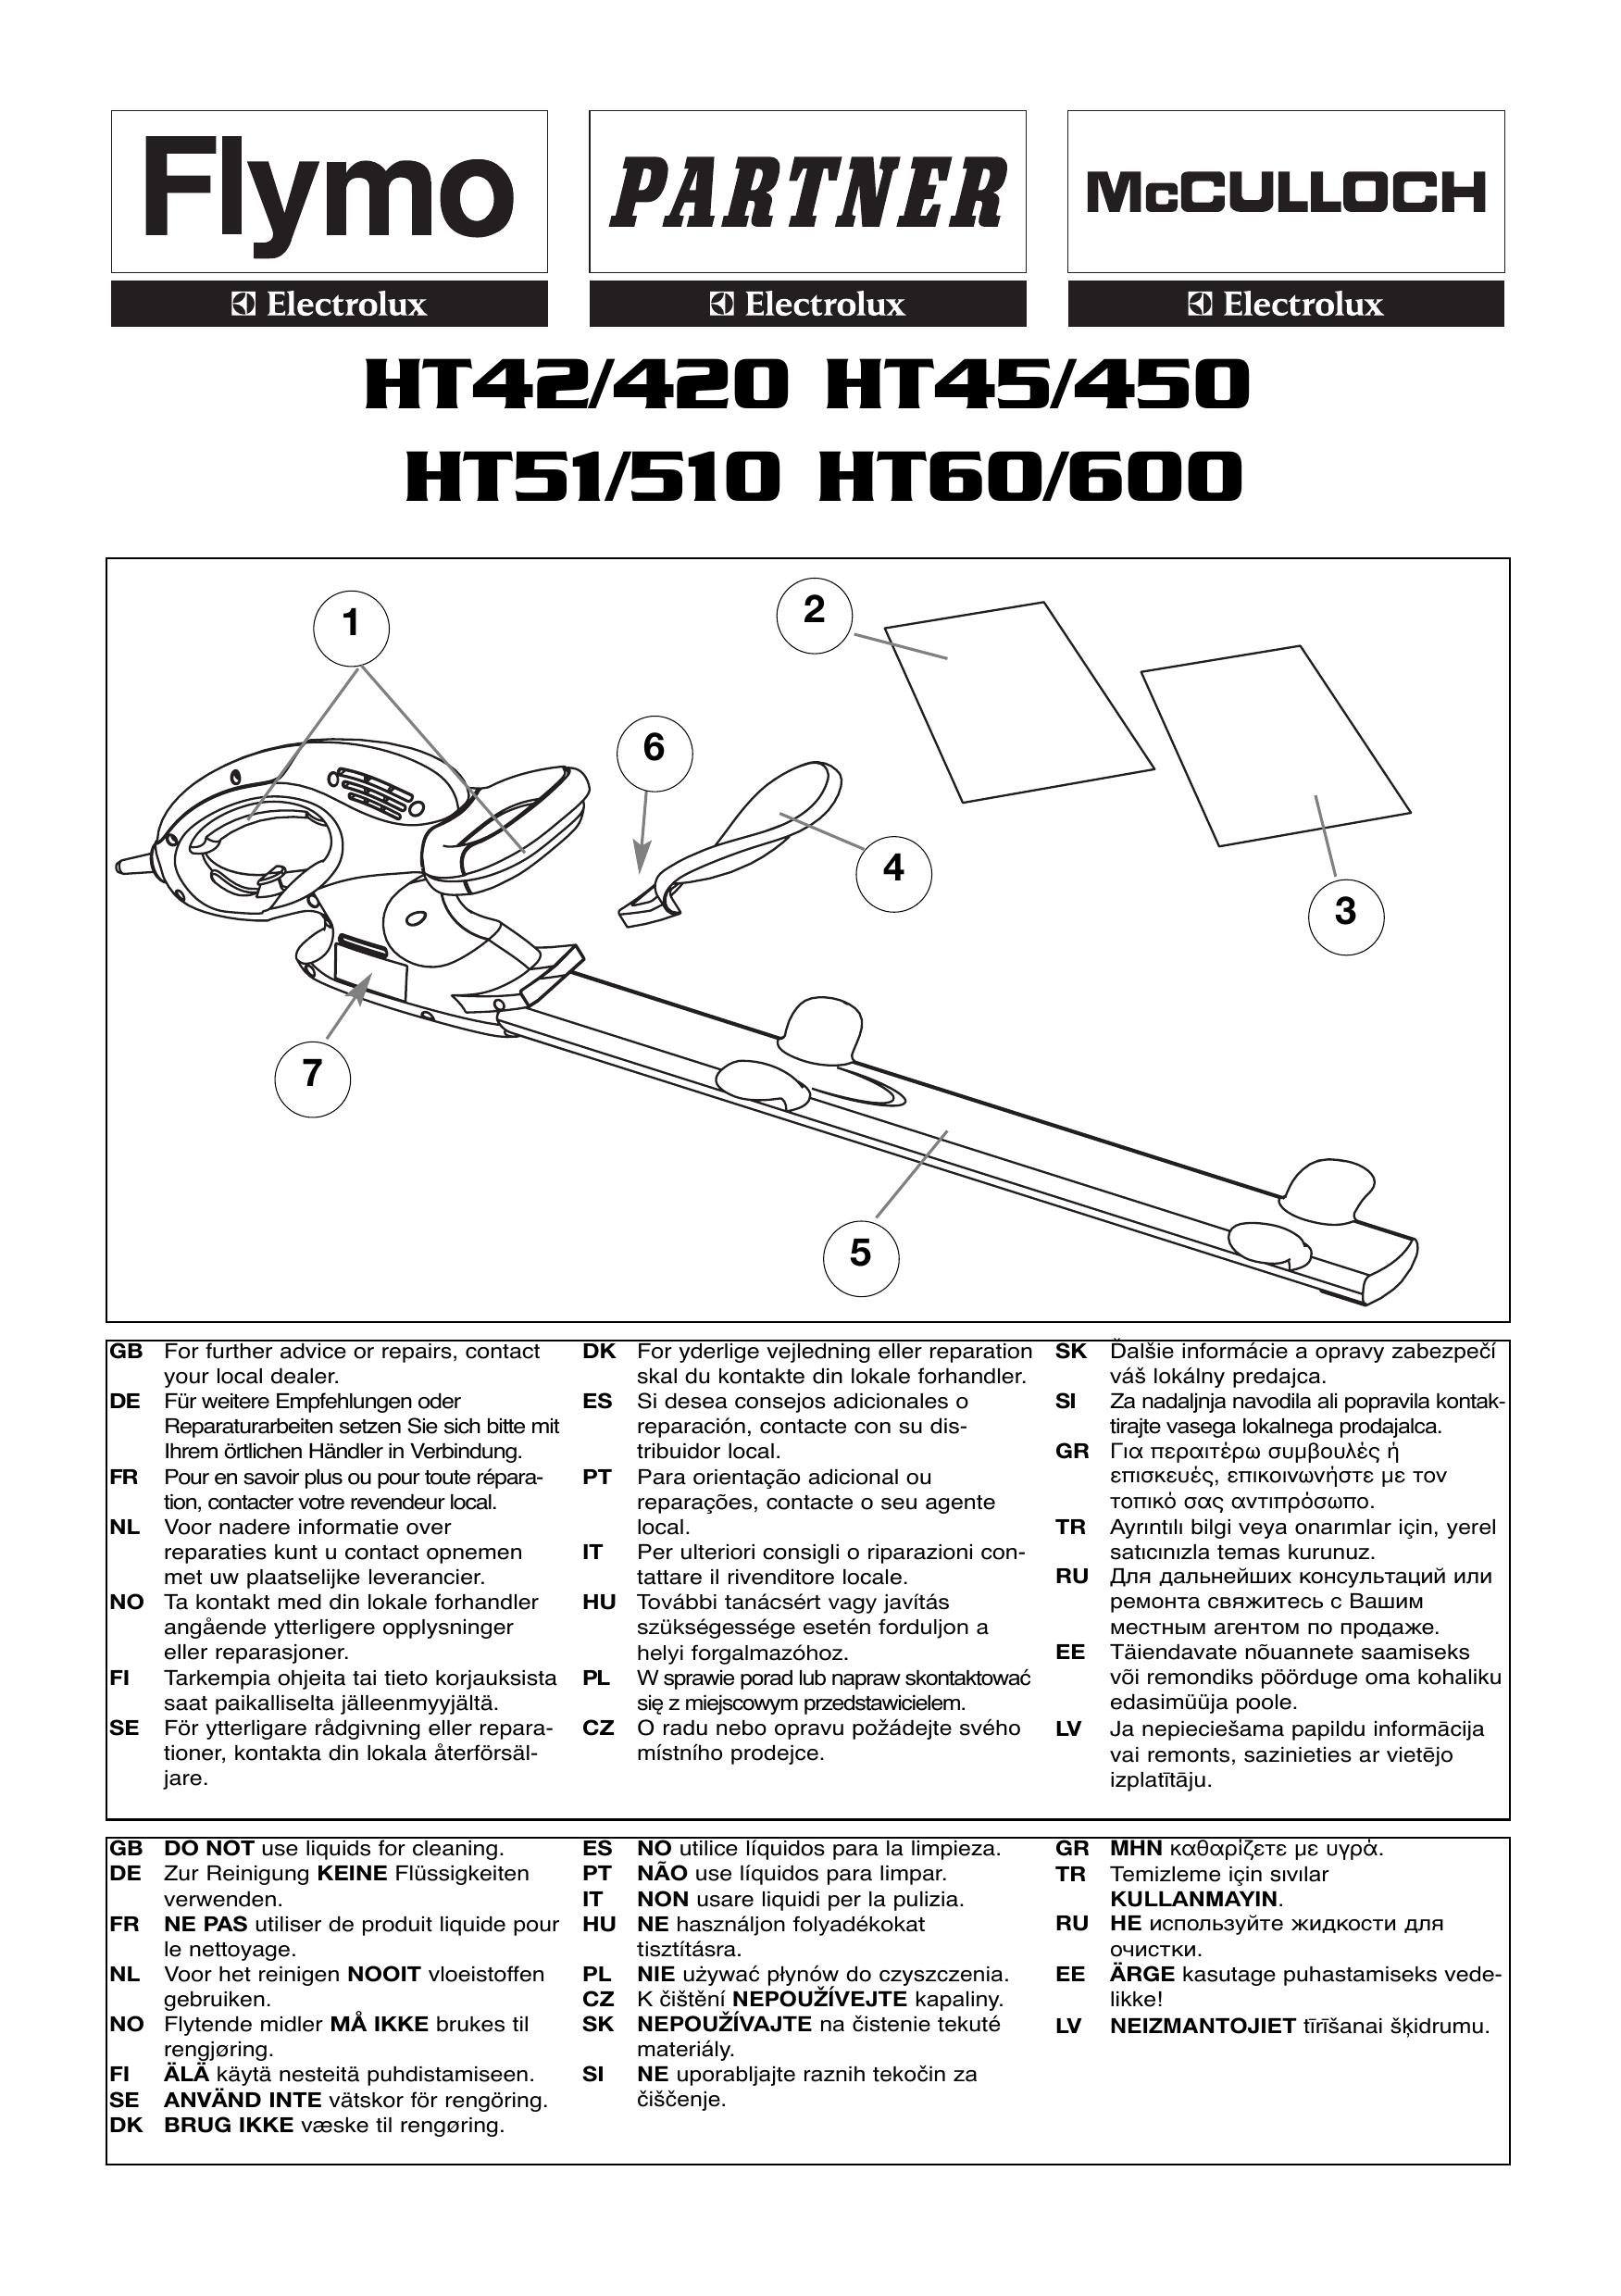 Flymo HT45/450 Trimmer User Manual